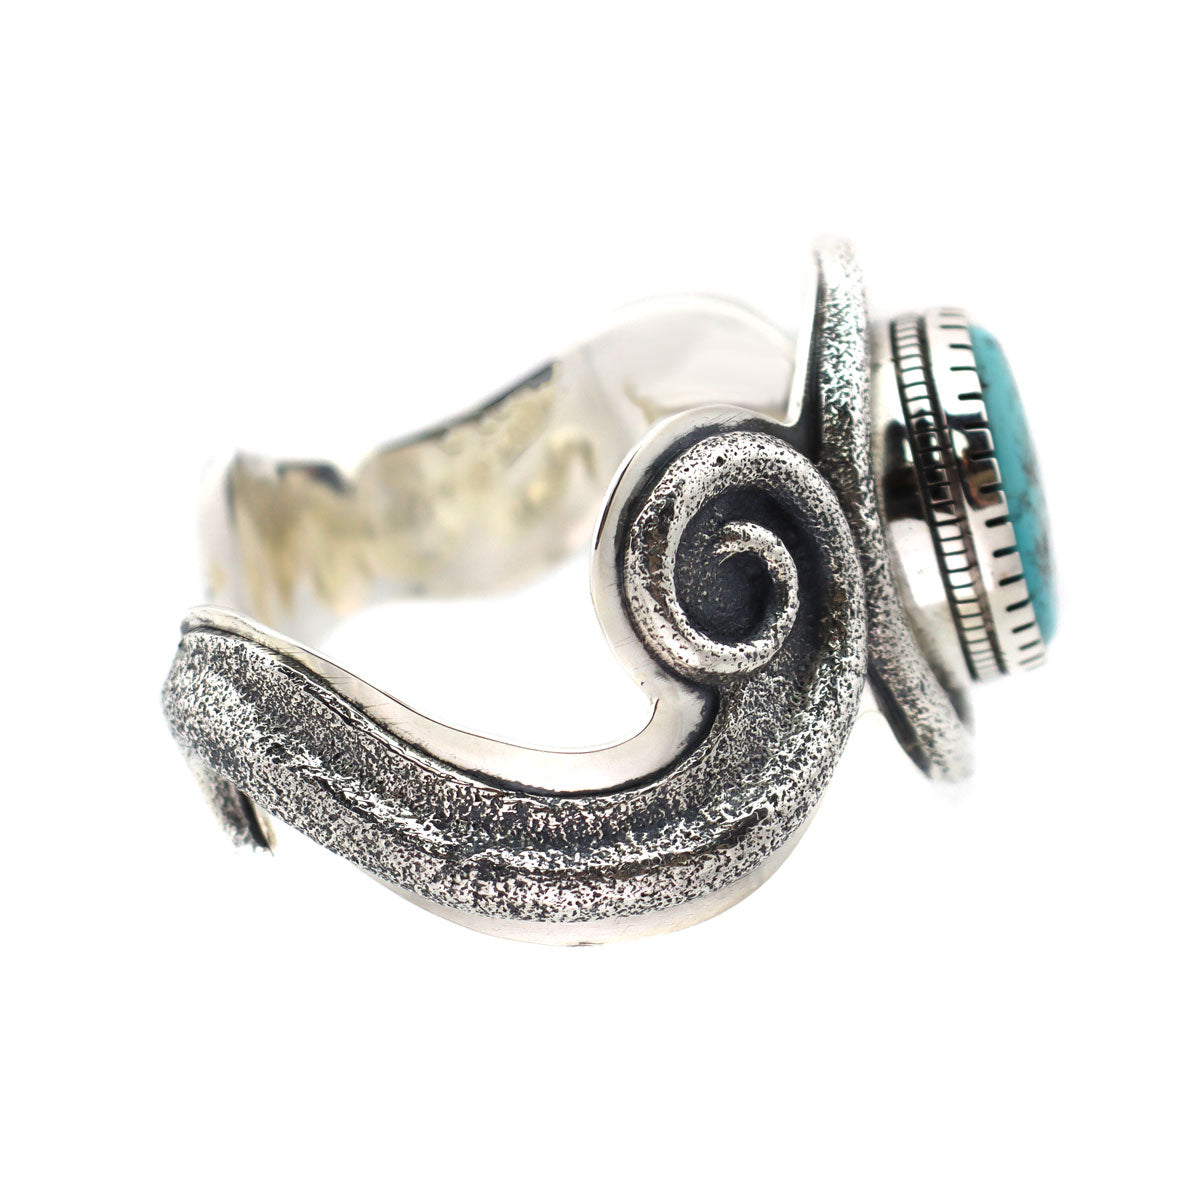 Roy Talahaftewa - Hopi Contemporary Turquoise and Silver Sandcast Bracelet with Spiral Design, size 7 (J14263)3